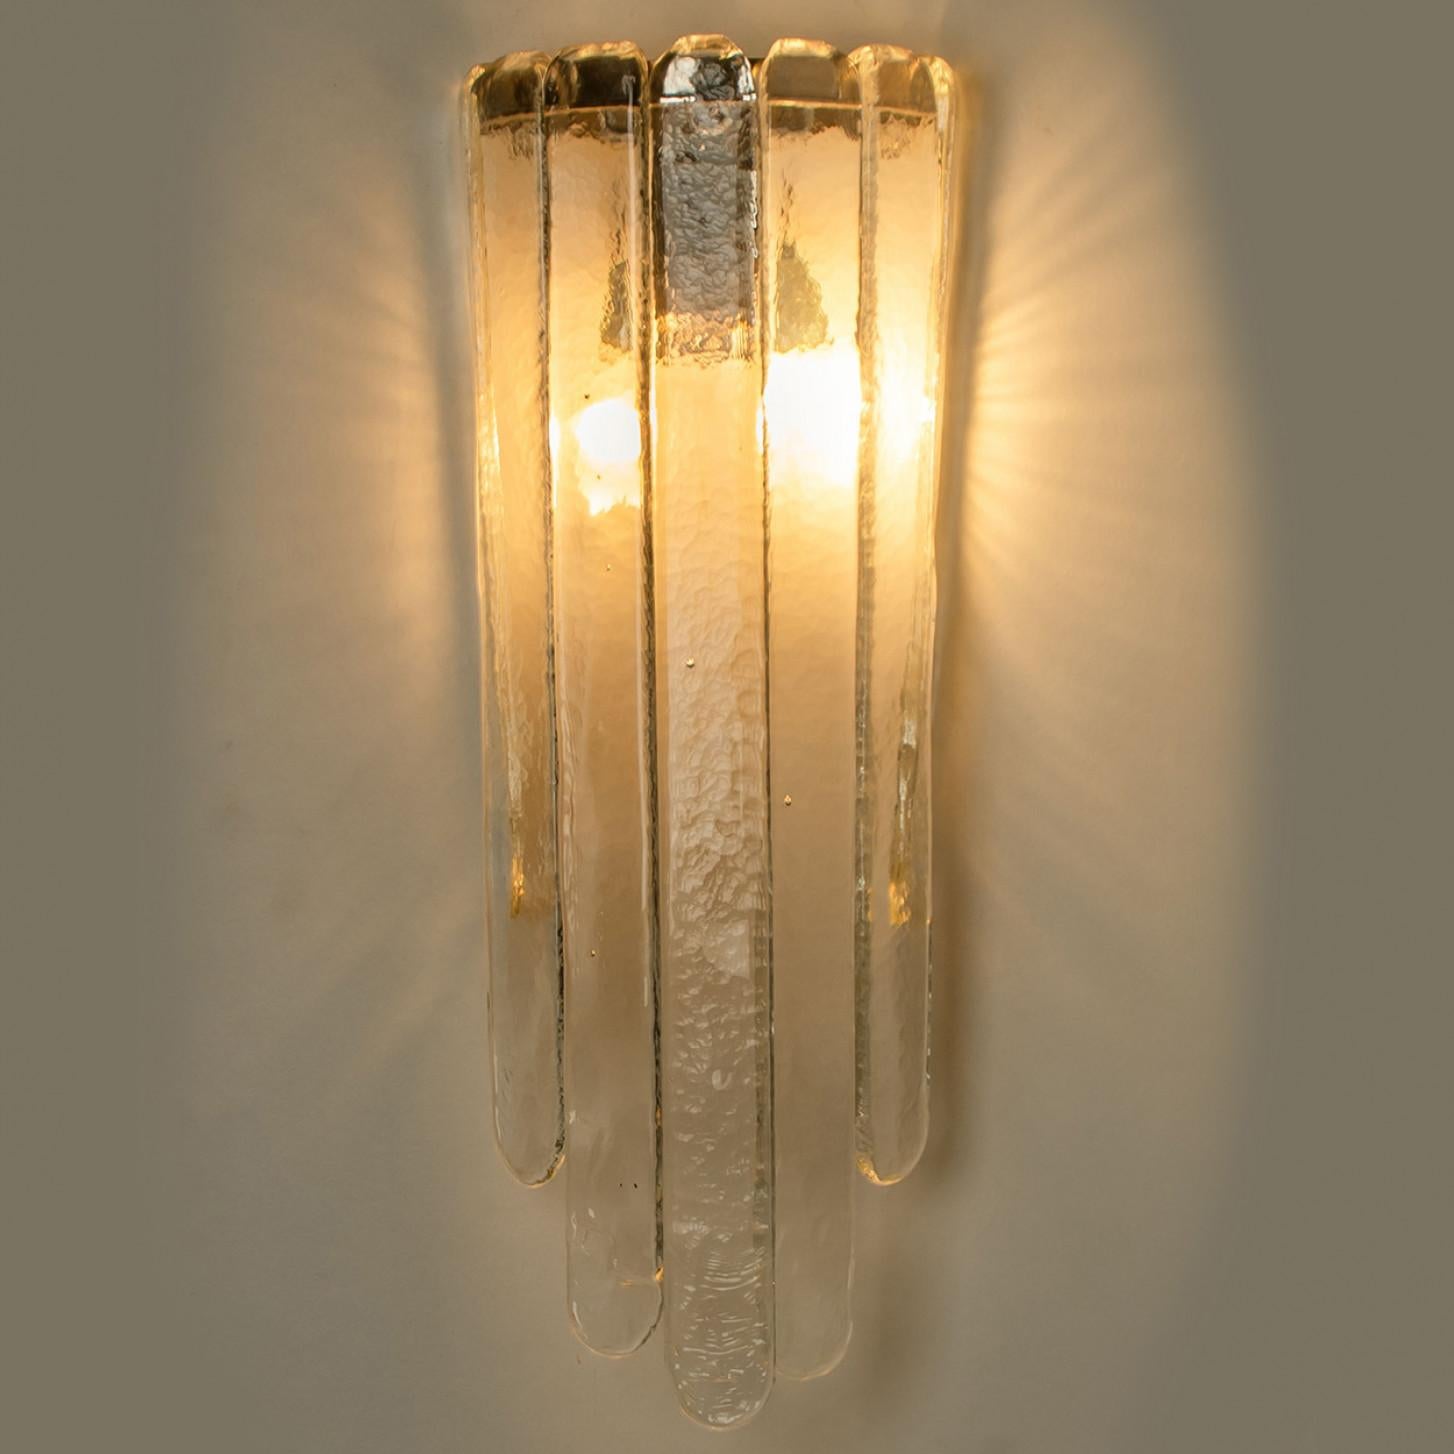 Pair of Long Clear Wall Lights, Mazzega, 1970s For Sale 6